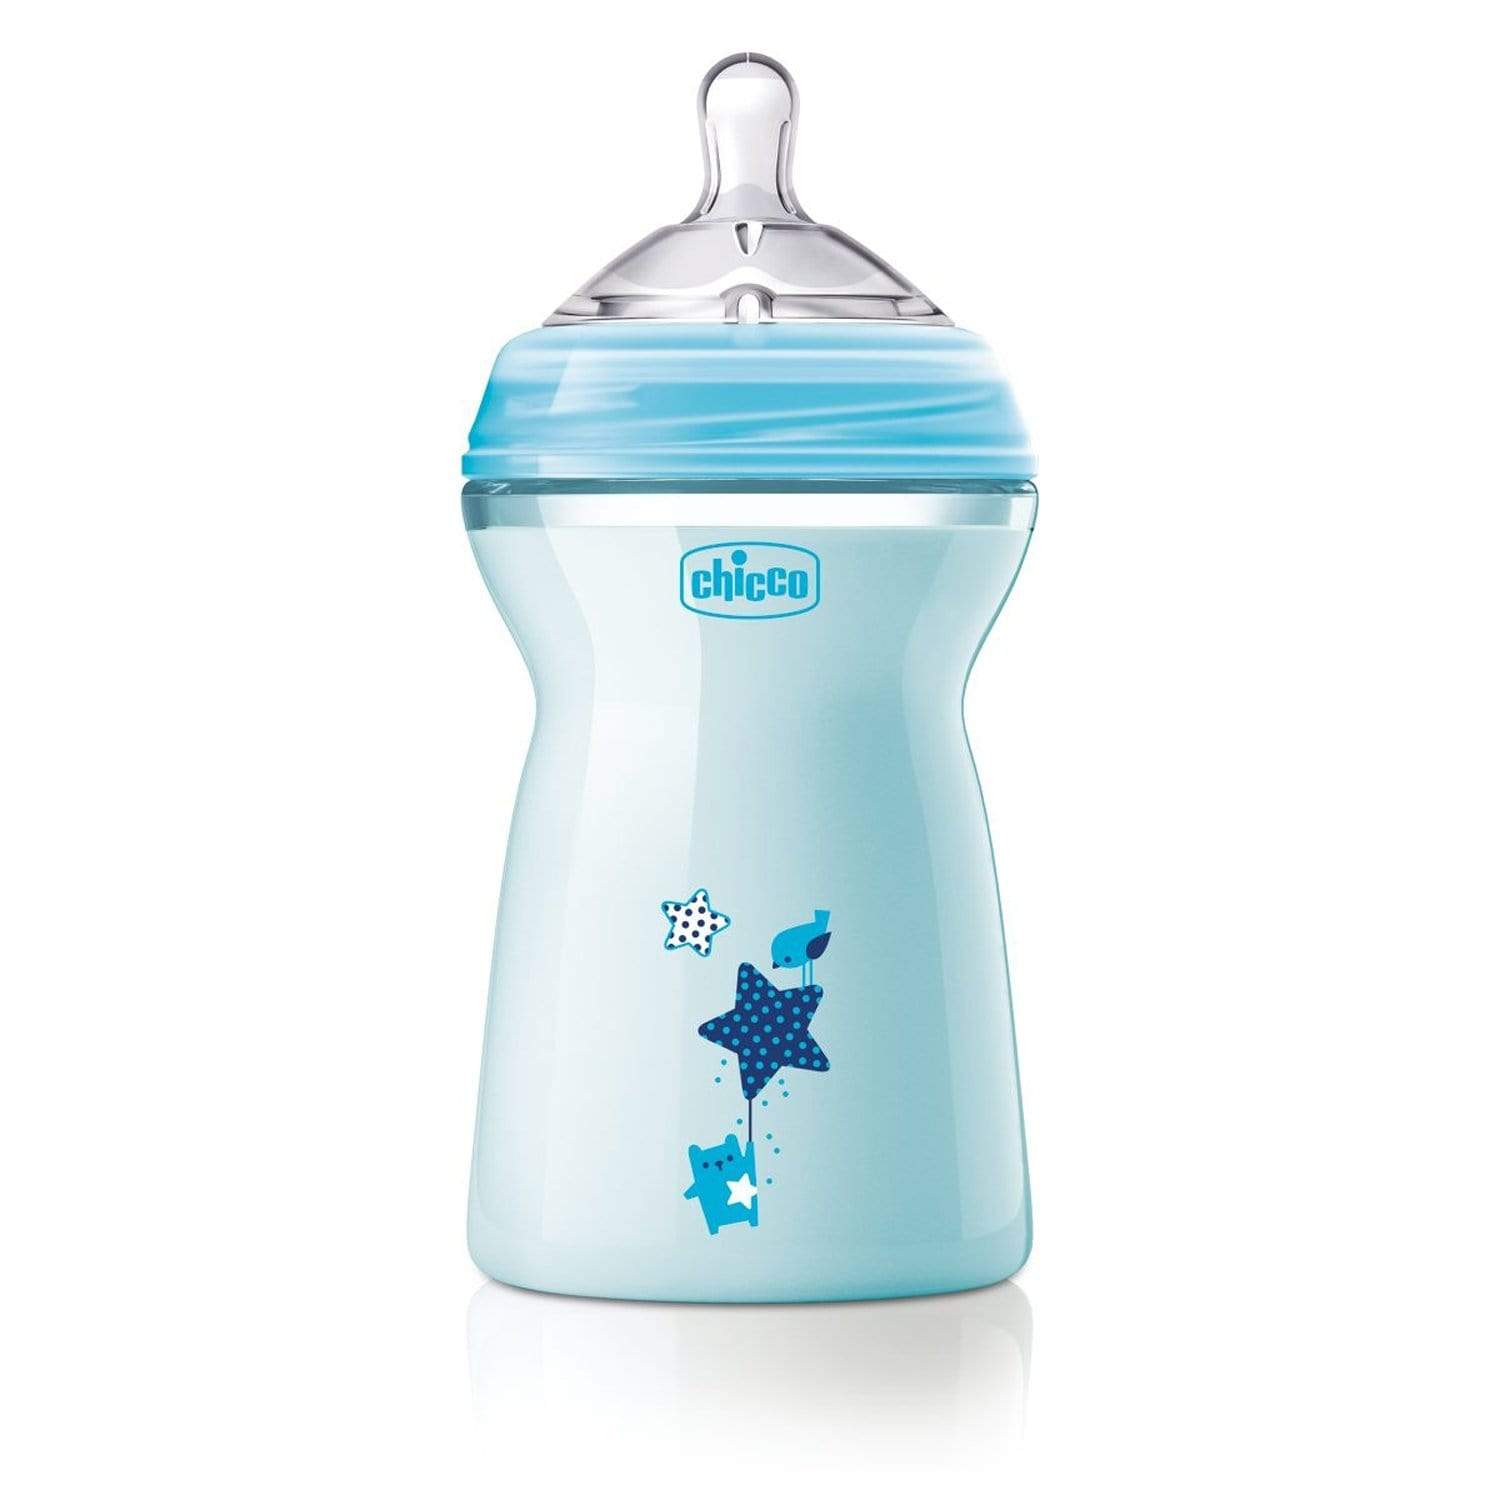 Chicco-Natural-Feeling-Feeding-Bottle-for-6-Months-and-Above-Baby-330ml-Light-Blue-CH80837-21